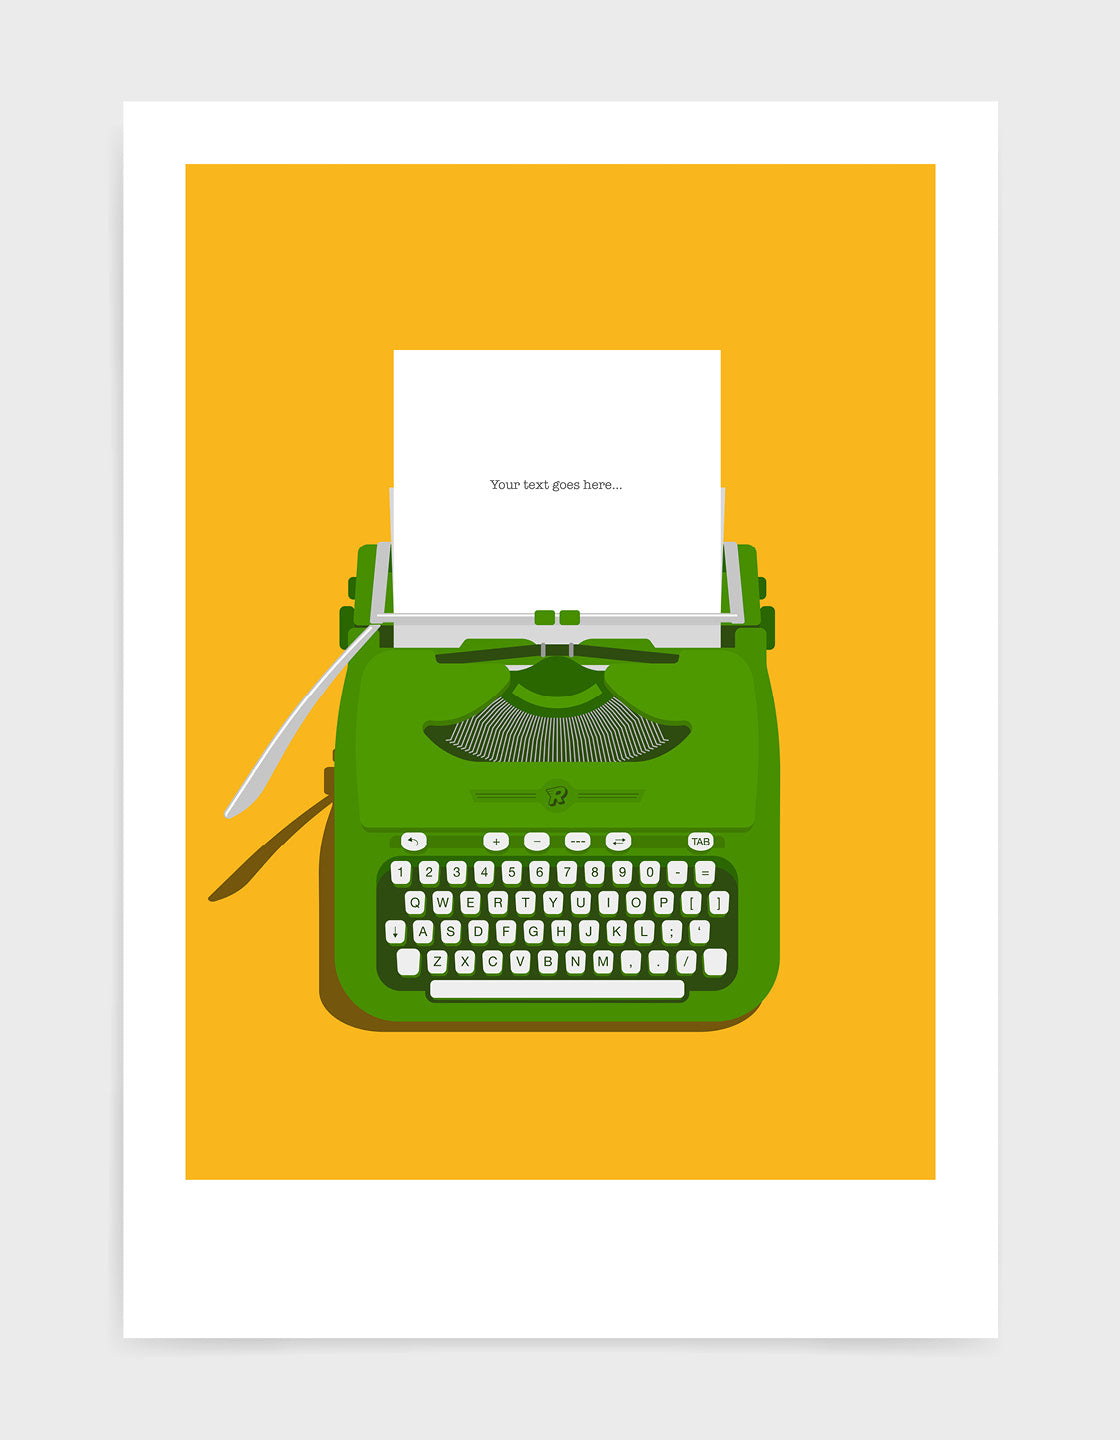 Art print showing a retro vintage typewriter in green with paper in the top and space to personalise the text. Set against a bright yellow background